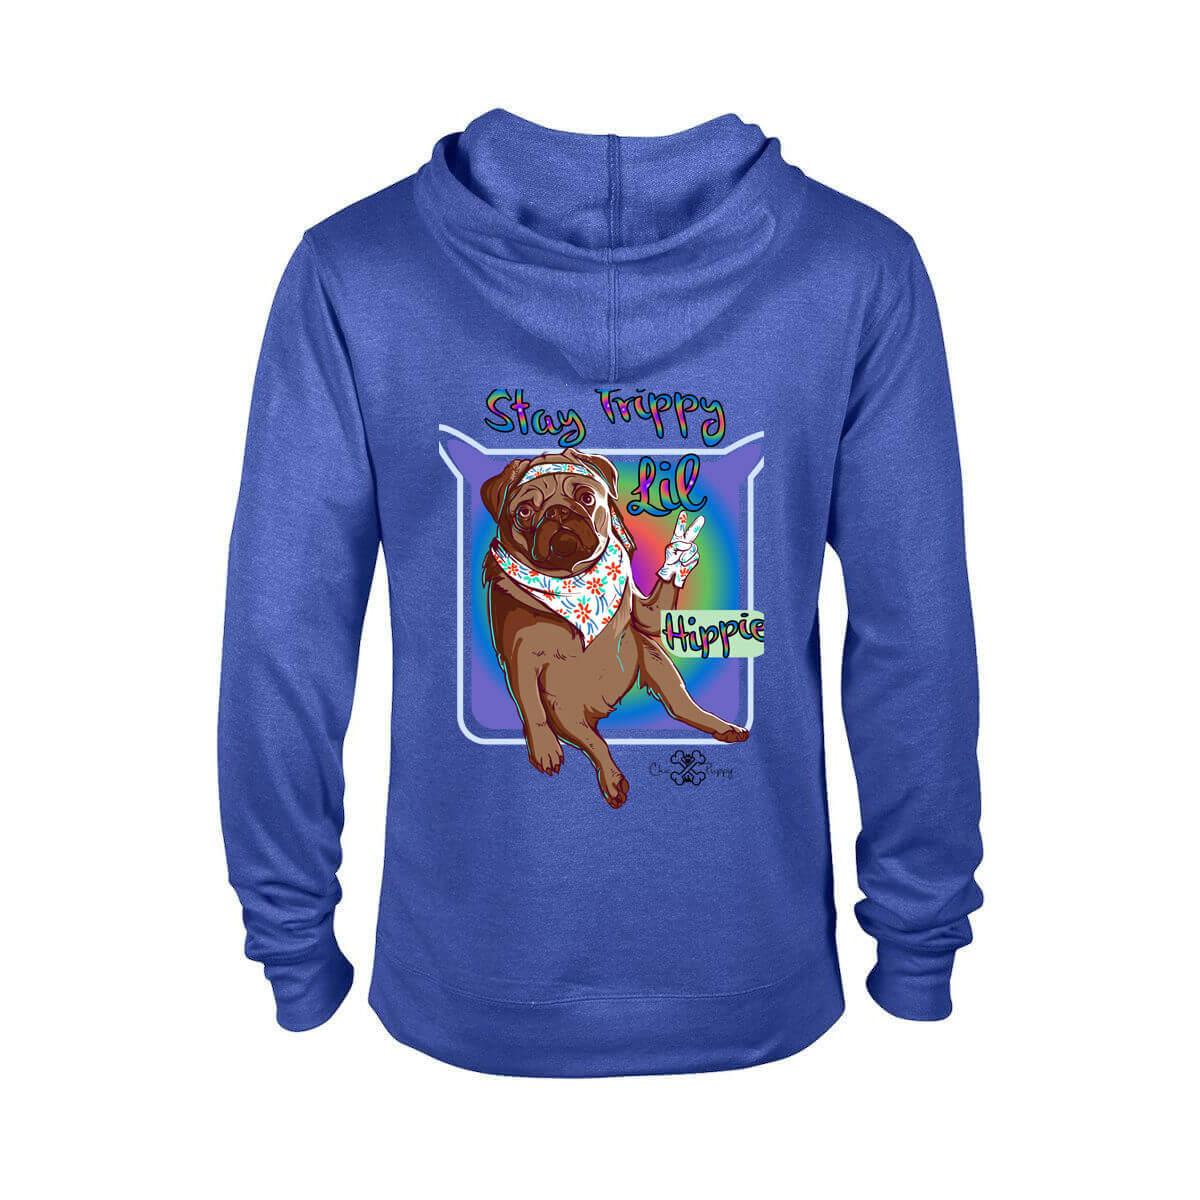 Matching Dog and Owner - Stay Trippy Lil Hippie - Women Hoodies - Women